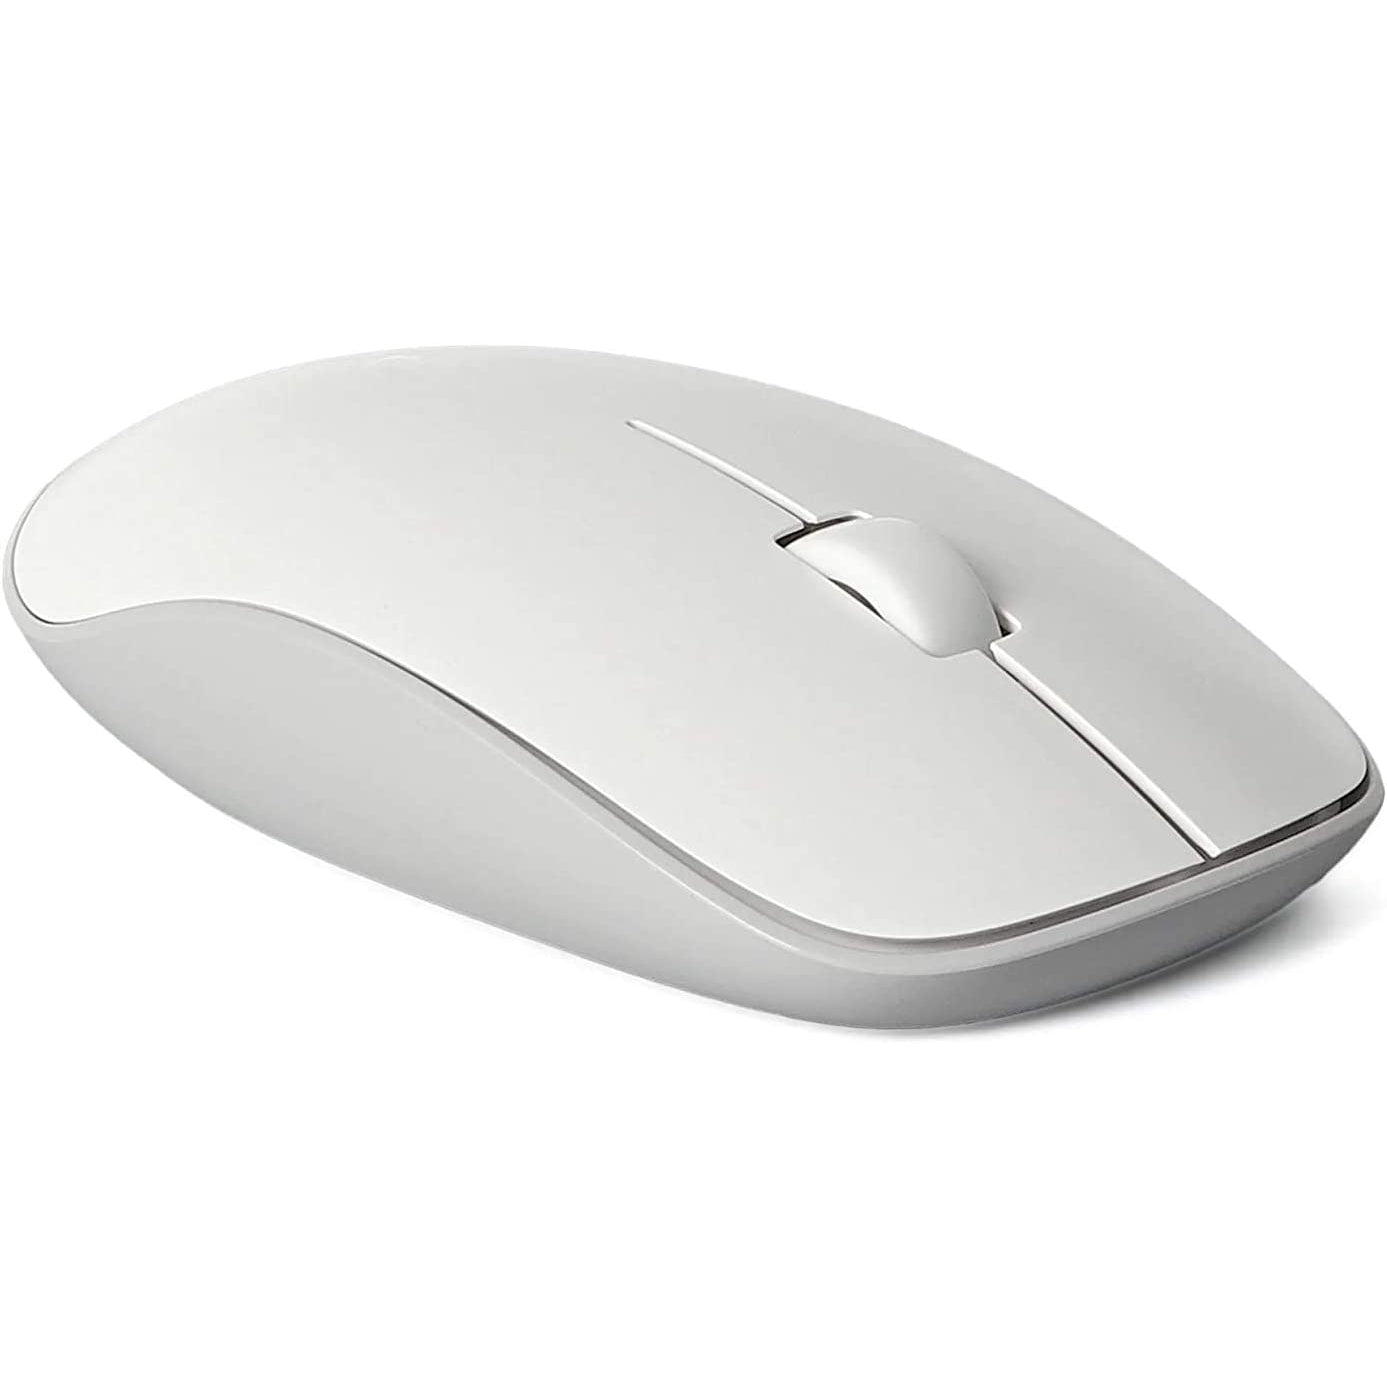 Rapoo M200 Silent Wireless Mouse - White - Refurbished Good